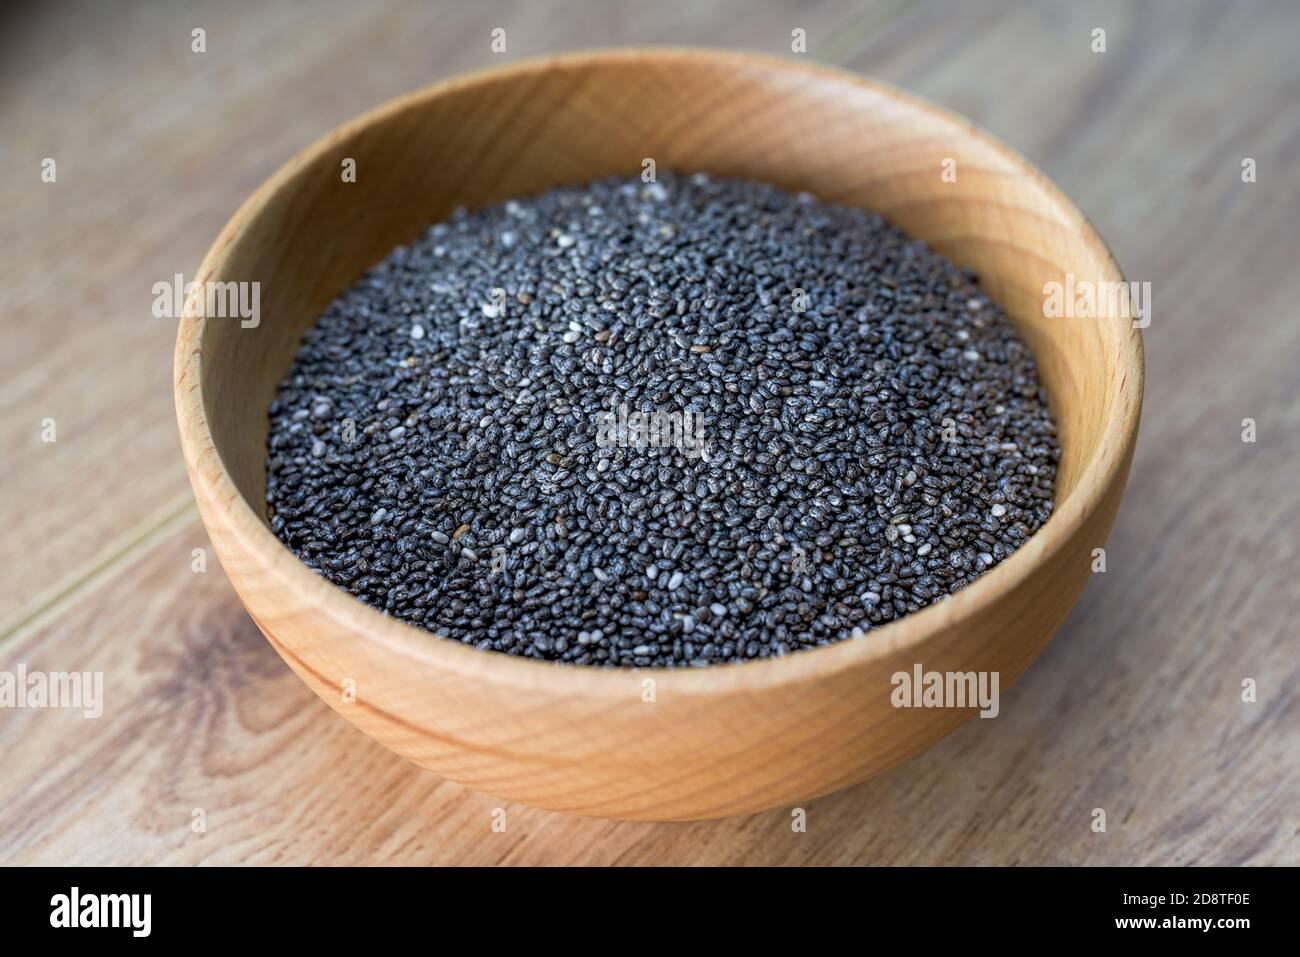 Poppy Seeds Chia High Resolution Stock Photography And Images Alamy Poppy seed is an oilseed obtained from the opium poppy (papaver somniferum). https www alamy com close up of a bowl of chia seeds in a wooden bowl image384083966 html